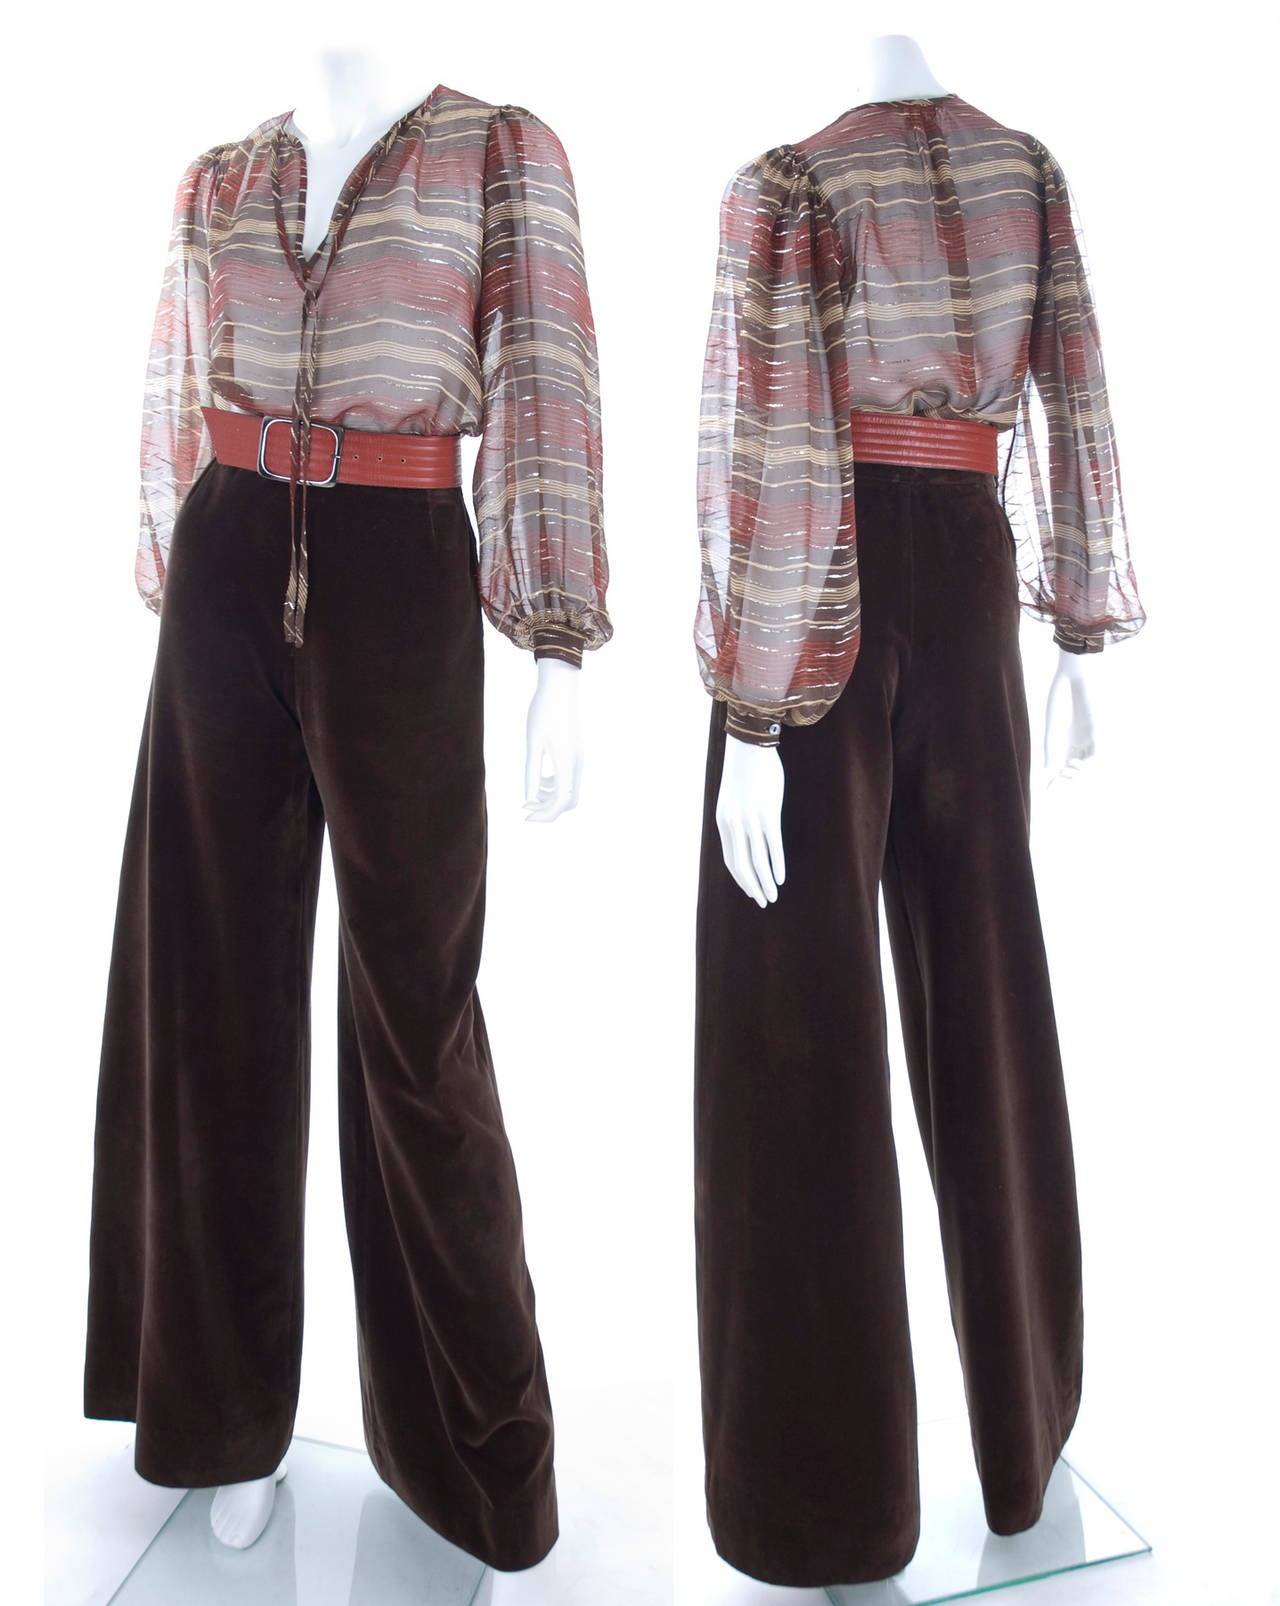 70's Yves Saint Laurent Brown Velvet Pants and Bohemian Blouse.
Sheer chiffon silk blouse brown,beige, rust red with gold thread.
Leather belt.
Pants fabric 58% cotton 42% Rayon
Blouse 100% Silk

Measurements:
Pants length 46